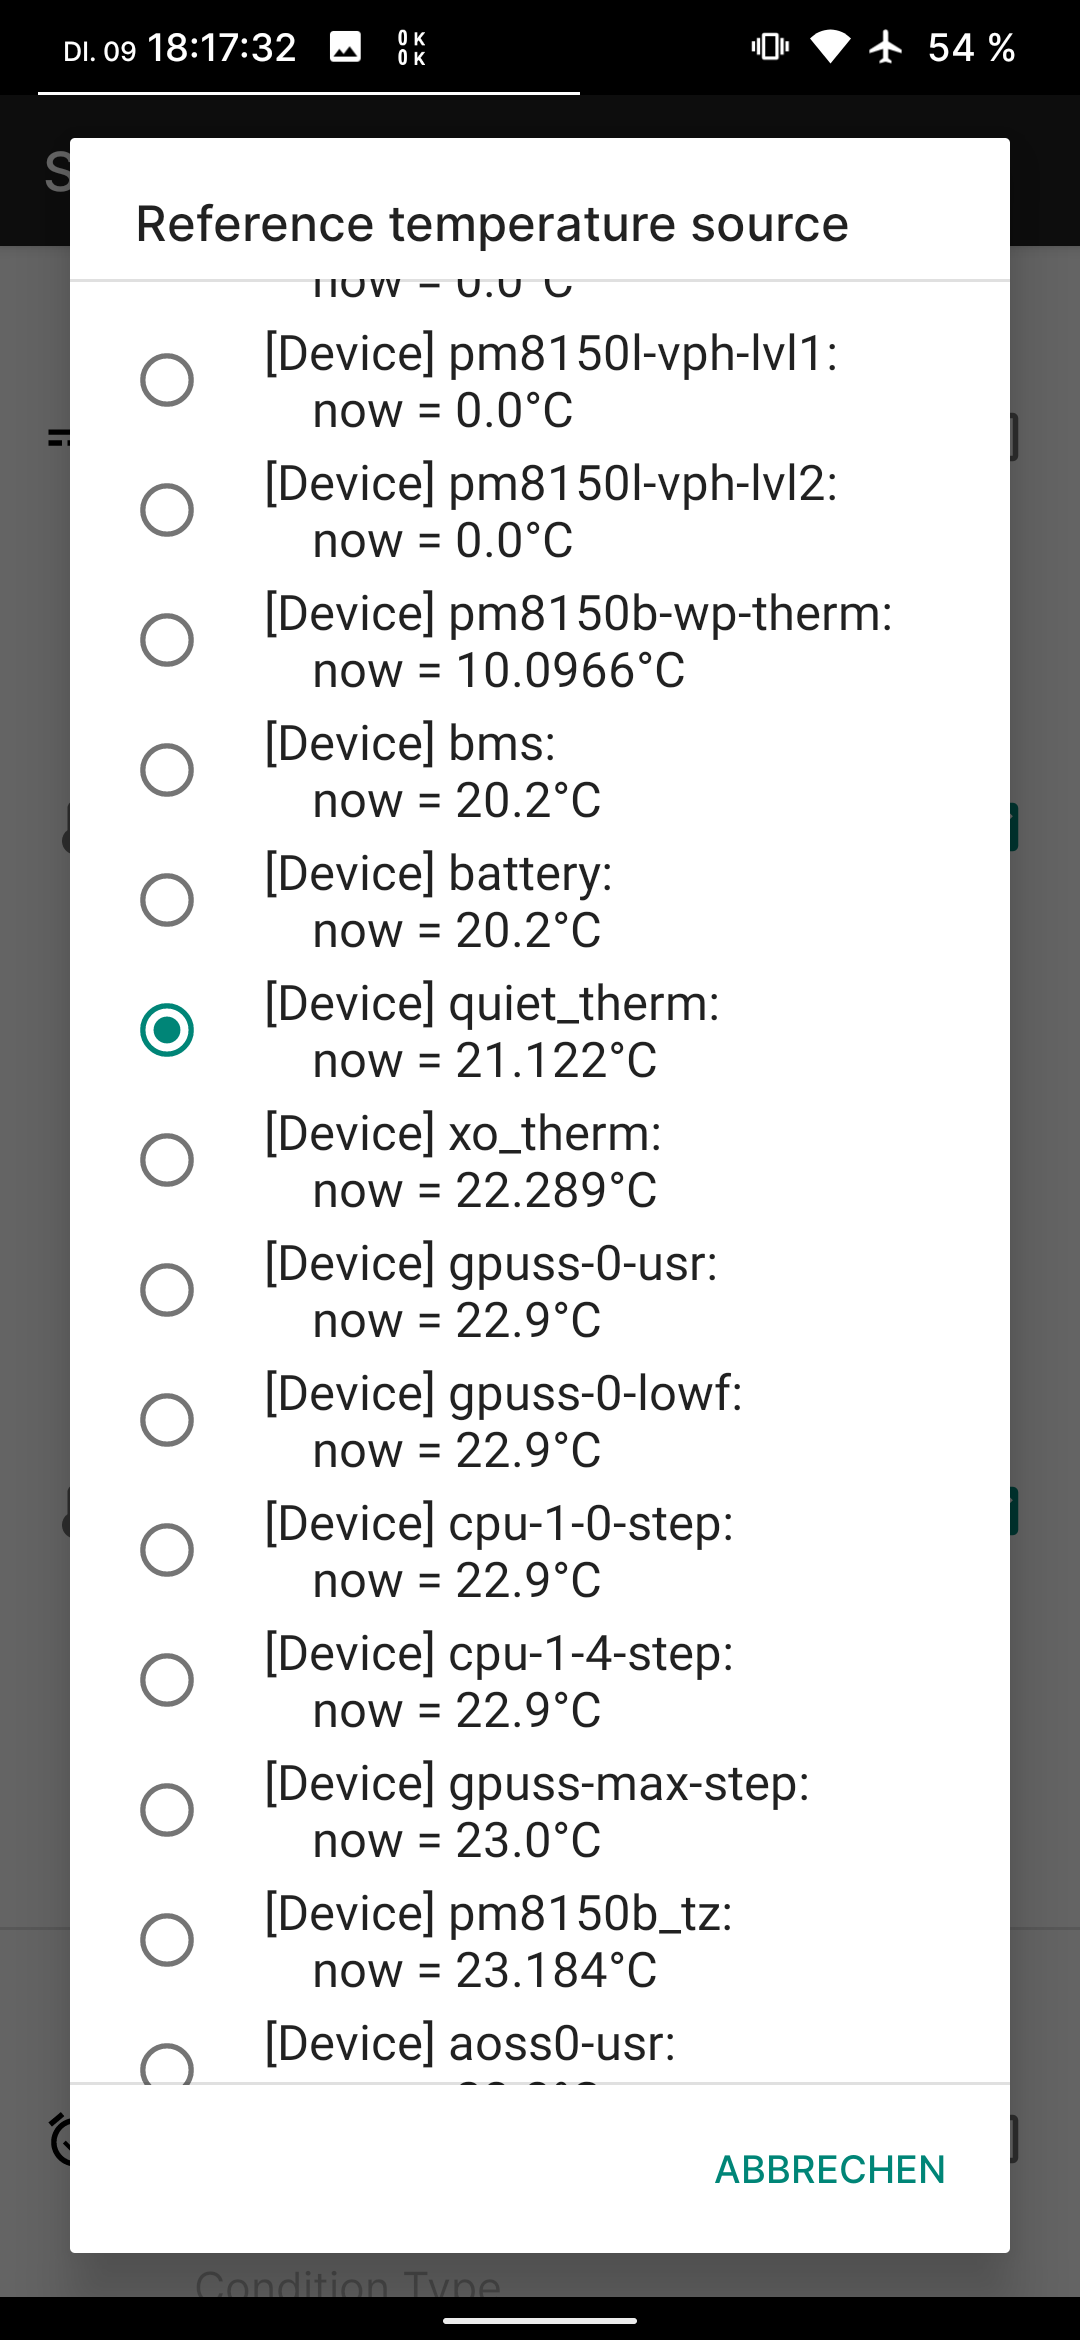 App temperature reference source